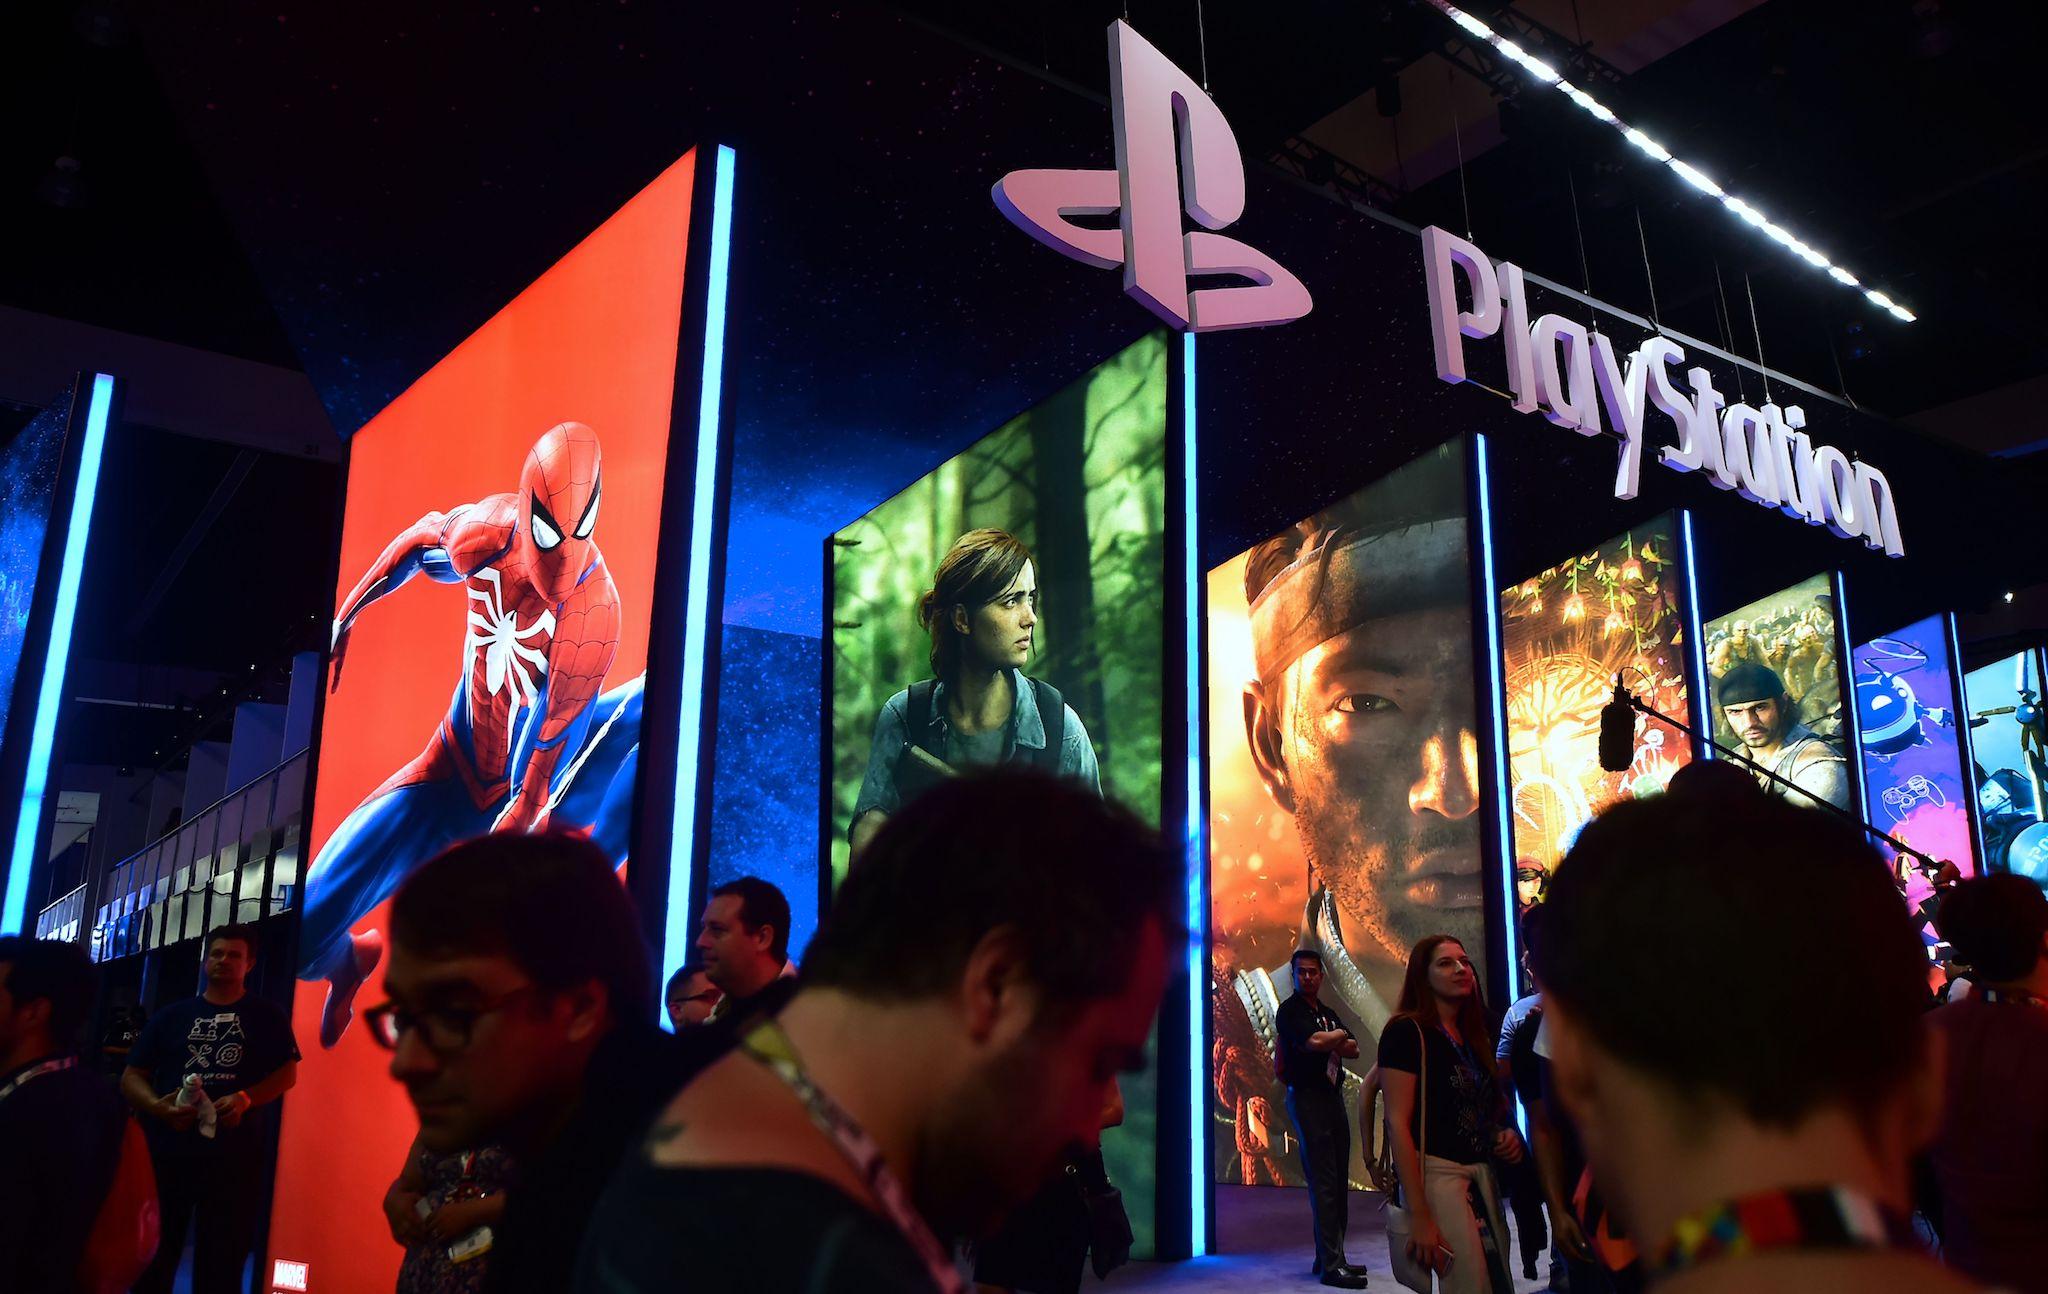 People wander in front of the Playstation posters at the 24th Electronic Expo, or E3 2018, in Los Angeles, California on June 12, 2018, where hardware manufacturers, software developers and the video game industry present their new games